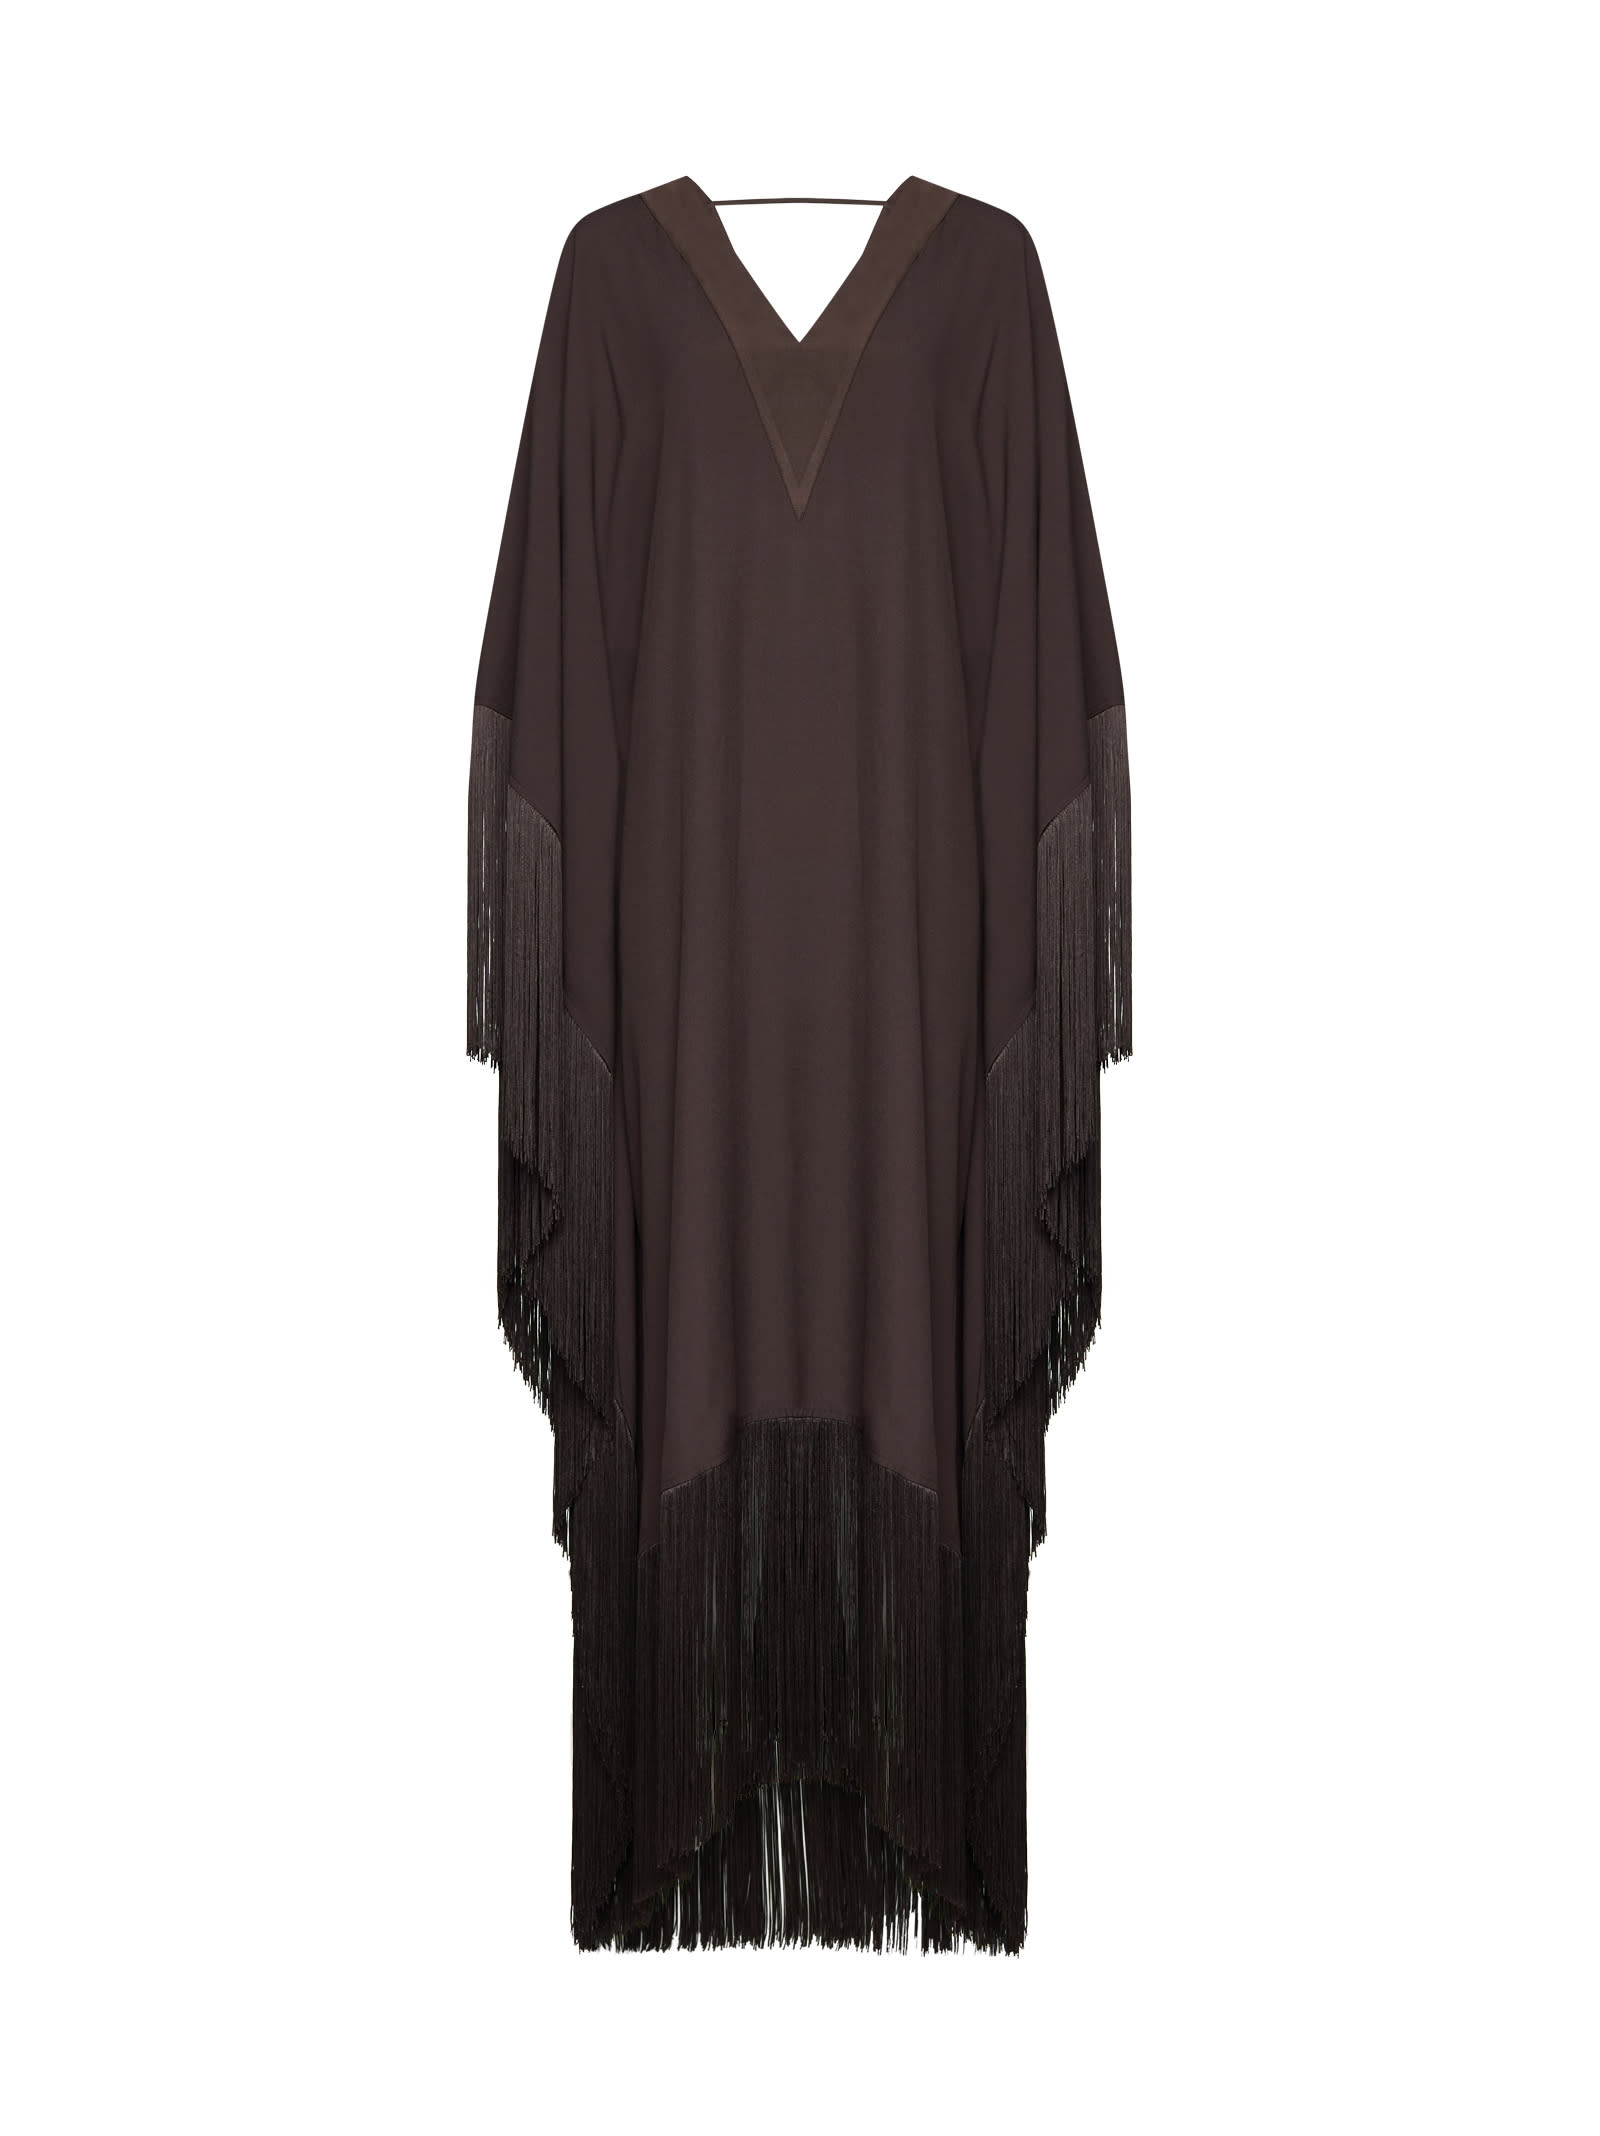 Taller Marmo Dress In Chocolate